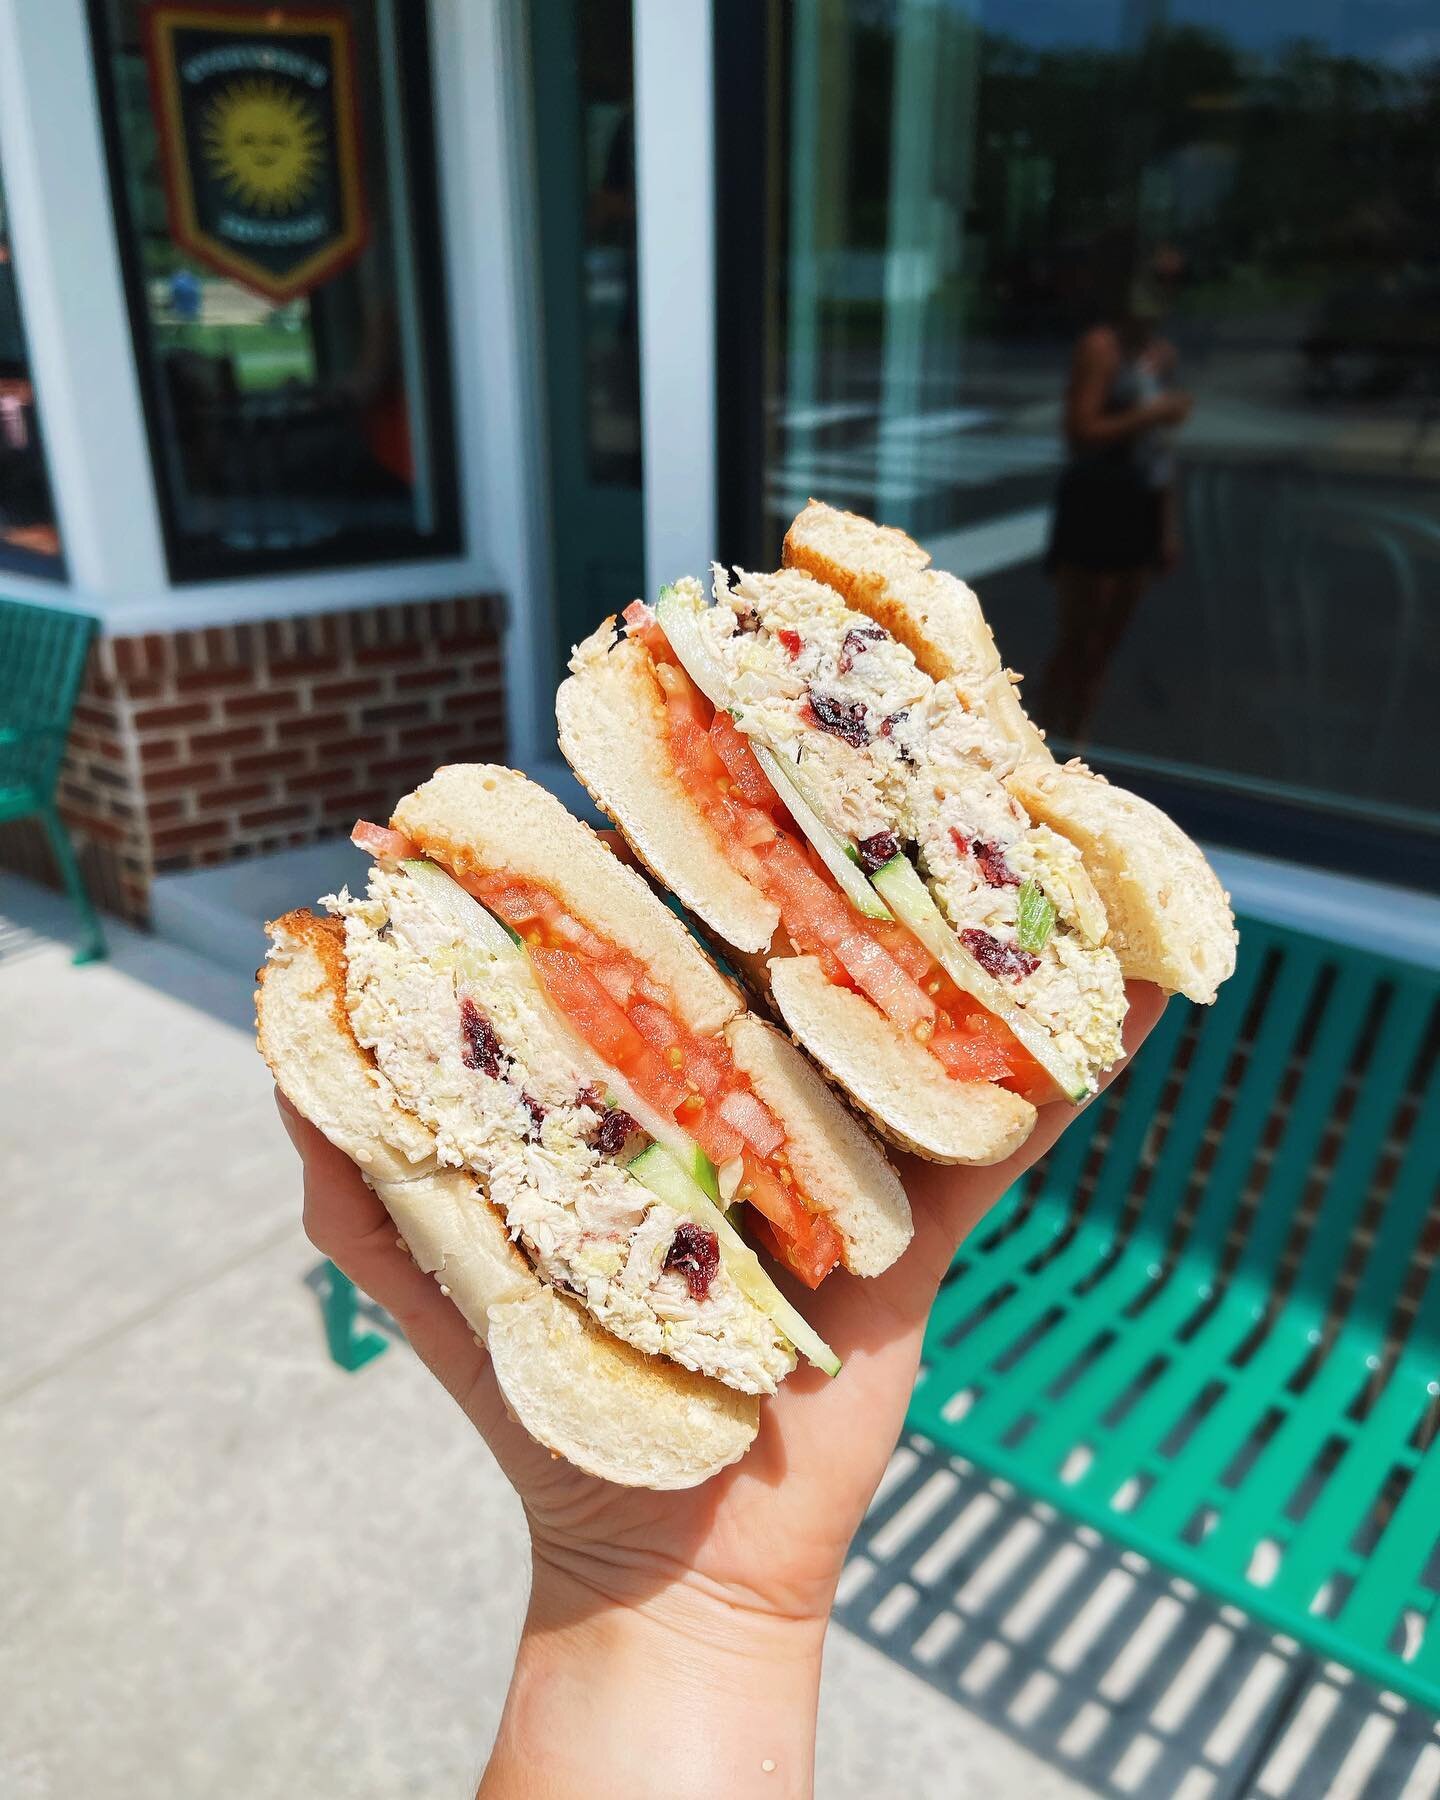 &ldquo;Moms chicken salad&rdquo; is our #1 selling light bite! Have you tried Jessie&rsquo;s moms recipe yet?! This one beauty is on a fresh toasted sesame bagel 🤤 #jessiesoflinwood #coffeecreamcommunity
.
.
.

#coffee #icecream #bakedgoods #lacolom